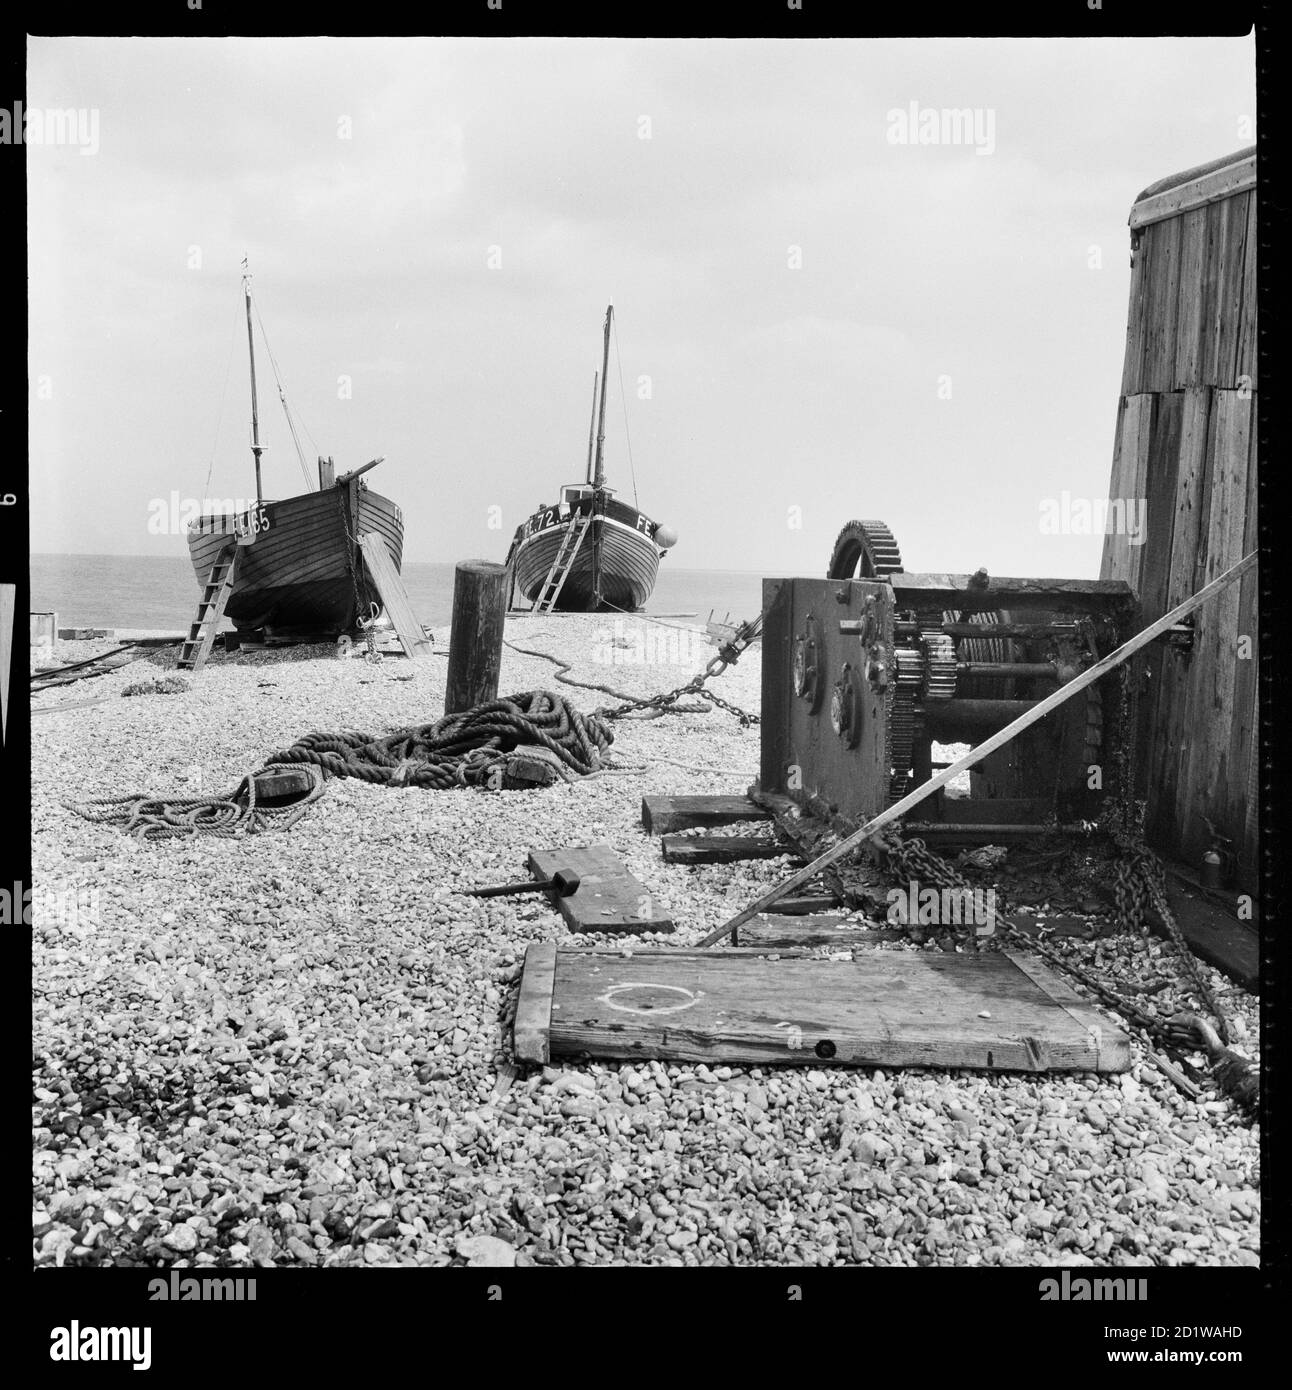 Dungeness, Lydd, Shepway, Kent. A boat winch and nearby boats on the beach at Dungeness. Stock Photo